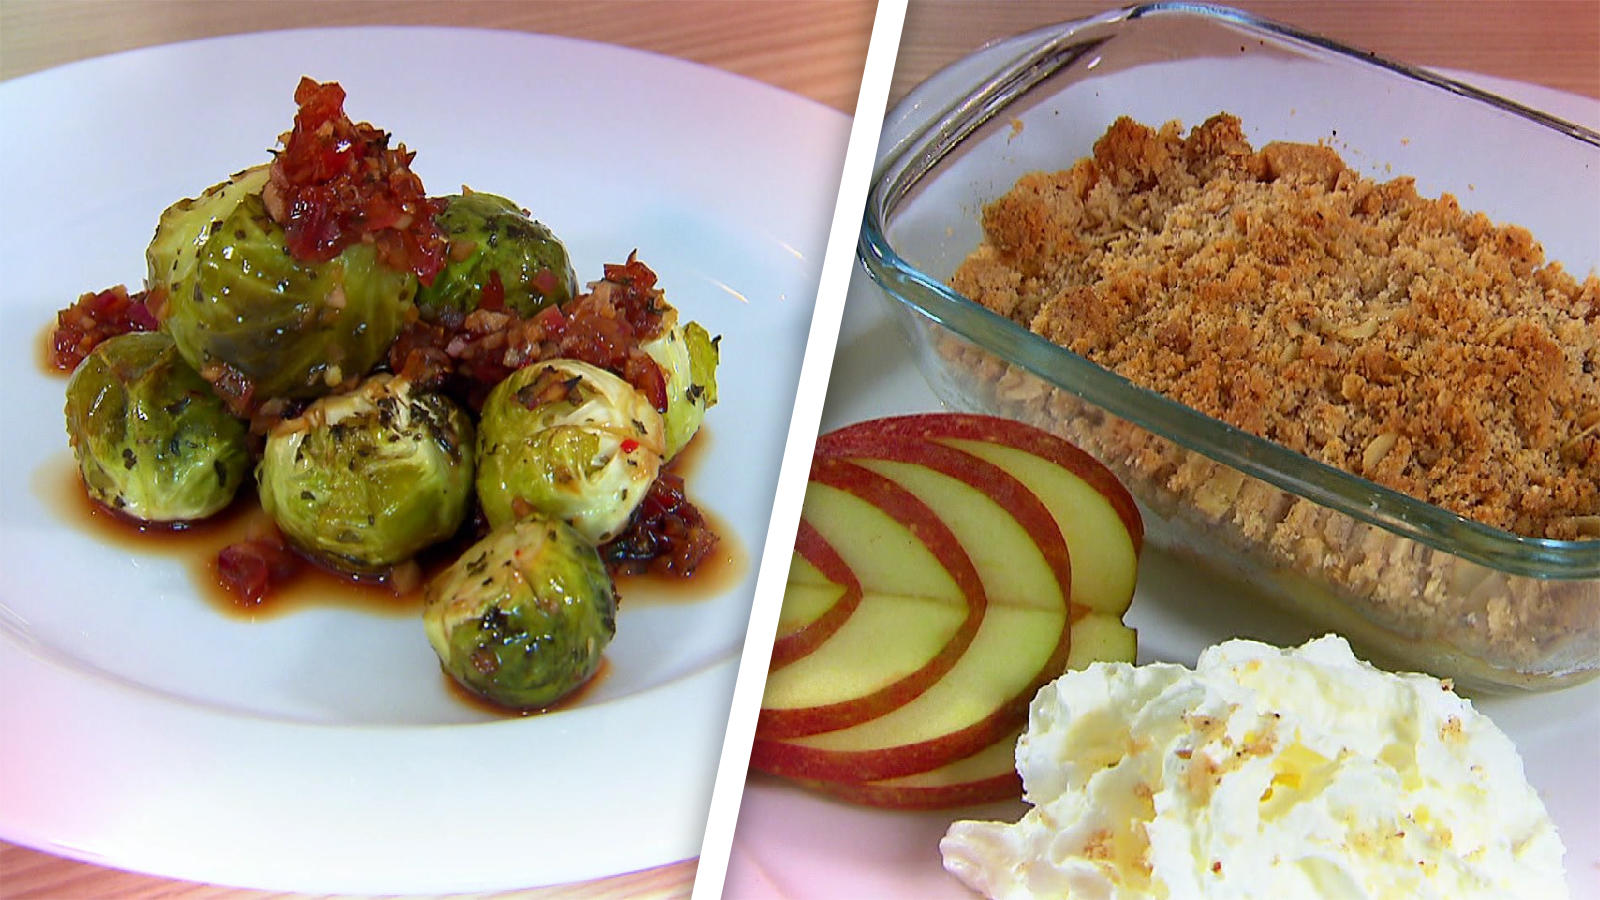 Quick Recipes: Asian-Style Baked Brussels Sprouts" and Apple Crumble New ideas for winter classics